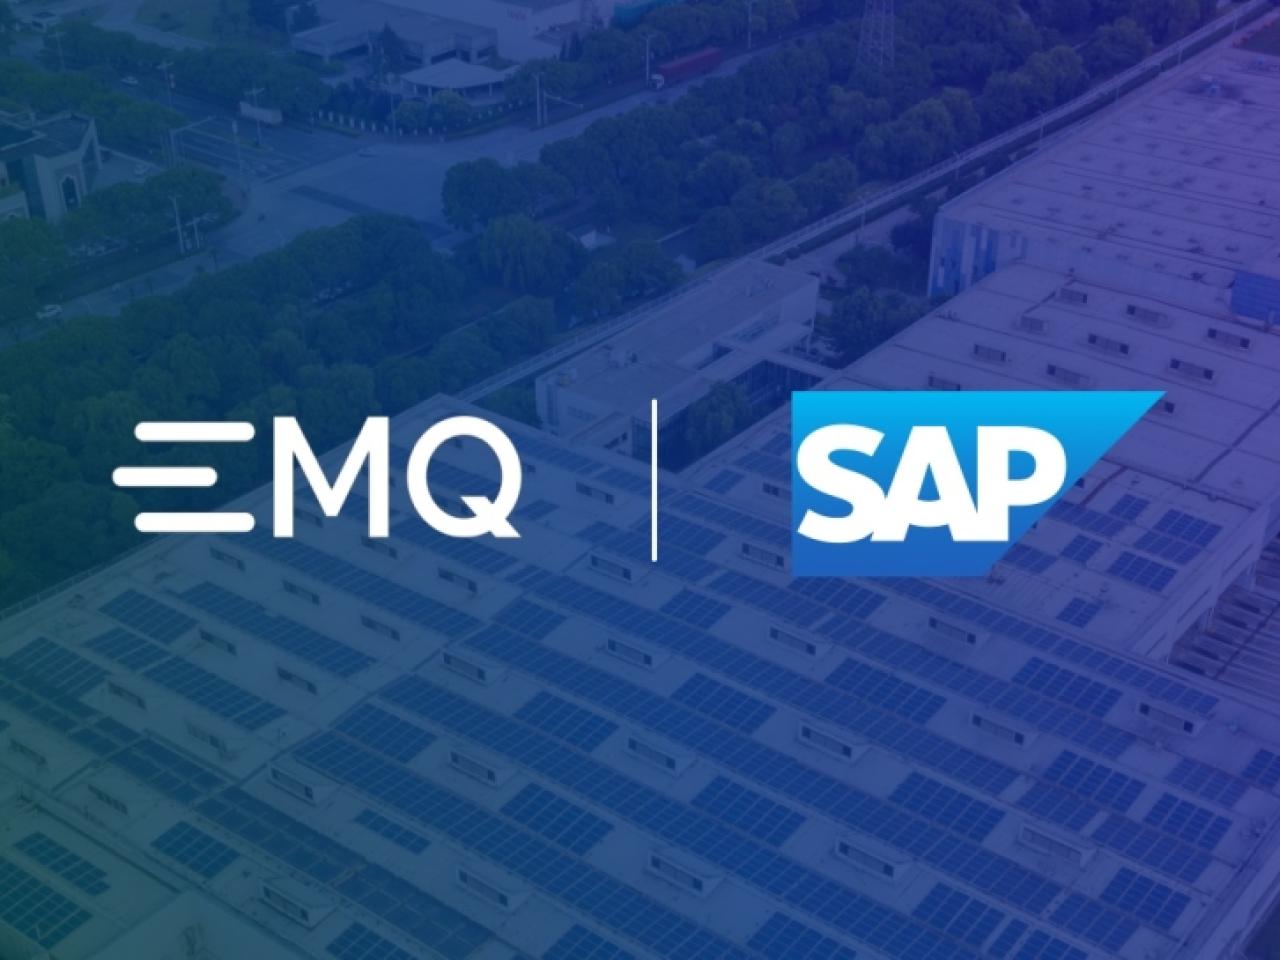 Logos for EMQ and SAP